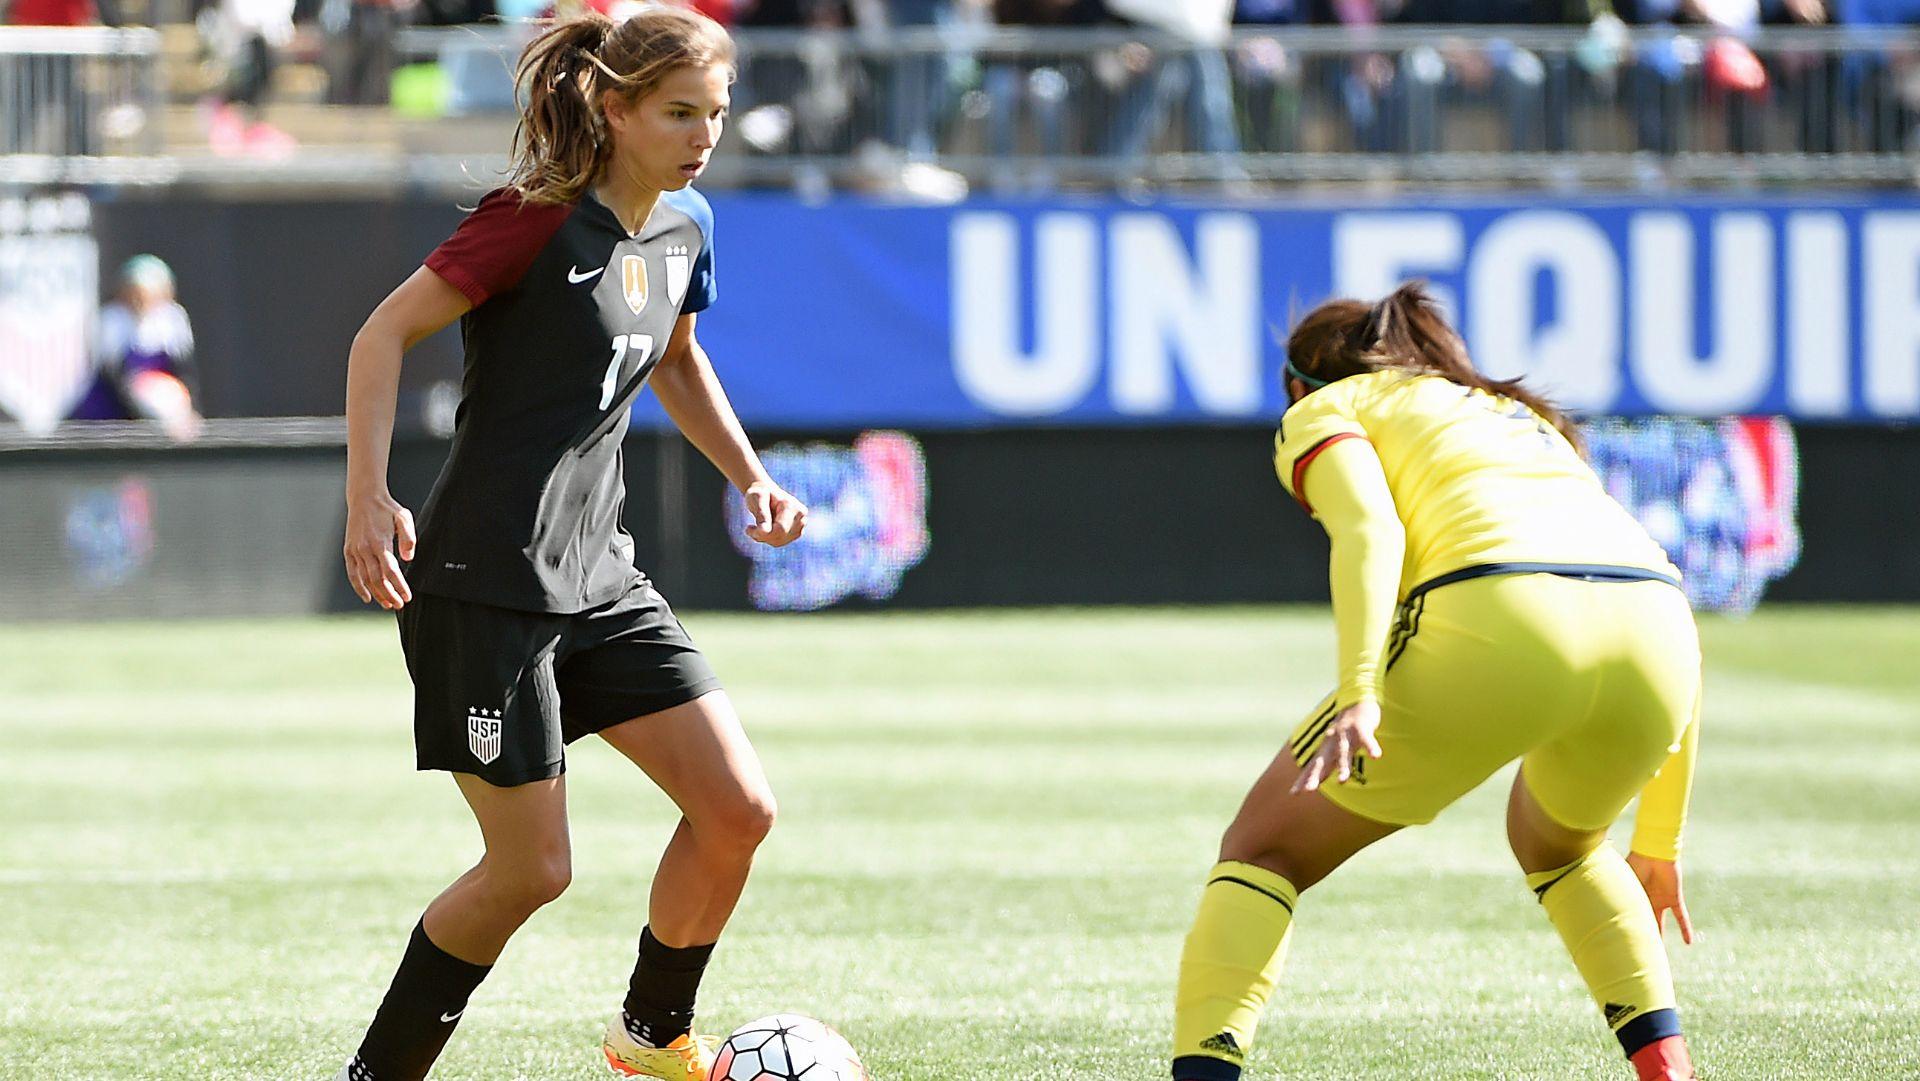 Rio Olympics: Three things to watch for as USWNT opens against New